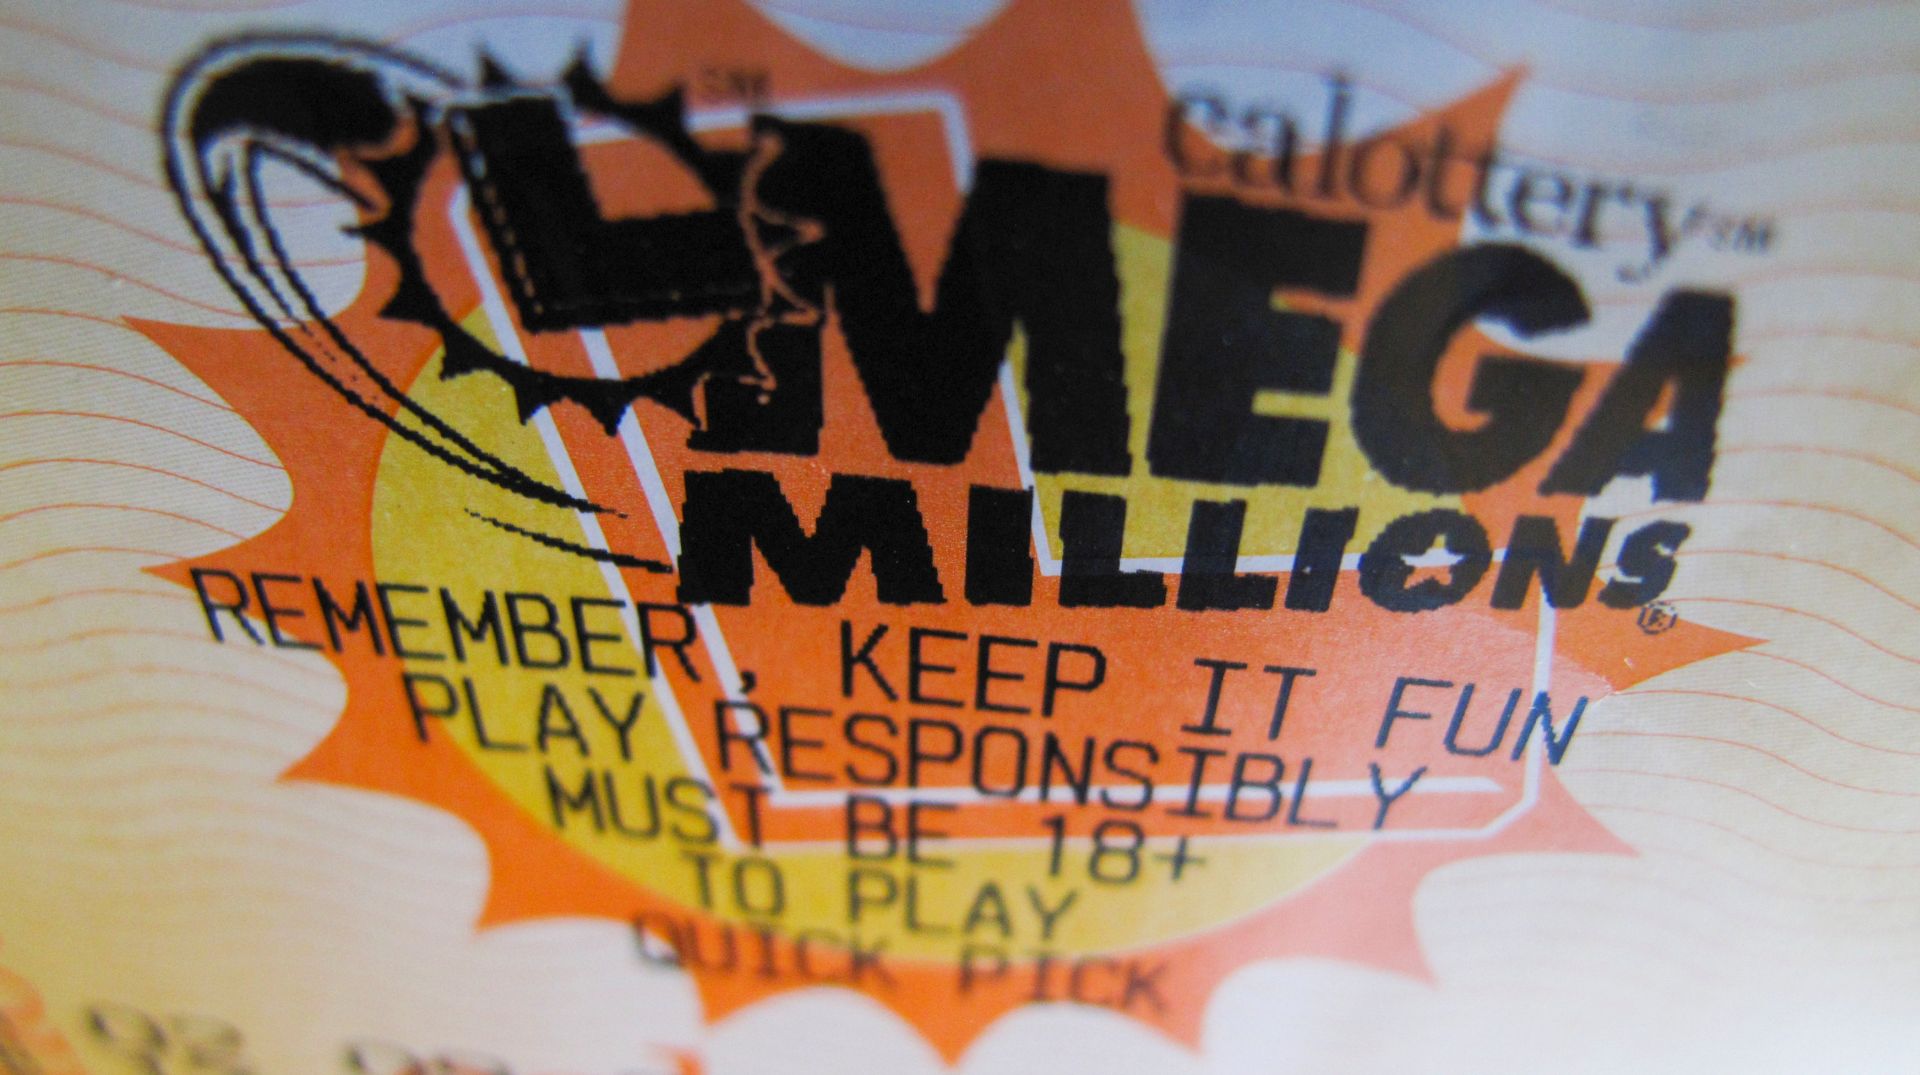 A lottery ticket for the current record breaking  $667 million U.S. Mega Millions jackpot is shown in this illustration photograph in Encinitas A lottery ticket for the current record breaking  $667 million U.S. Mega Millions jackpot is shown in this illustration photograph in Encinitas, California, U.S. October 16, 2018.  REUTERS/Mike Blake MIKE BLAKE